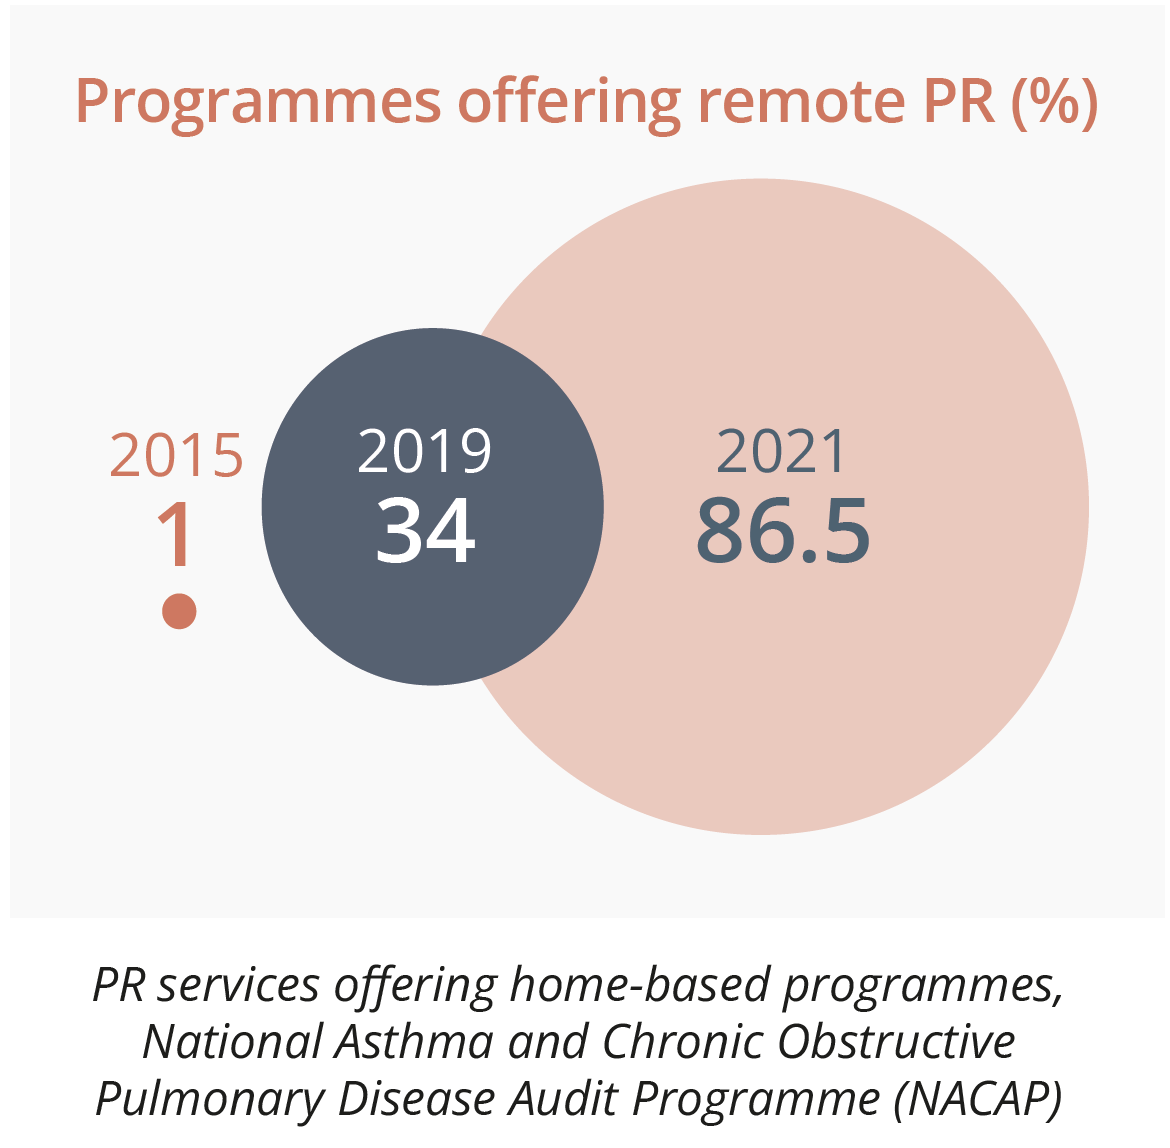 Pulmonary rehabilitation services offering home-based programmes are increasing